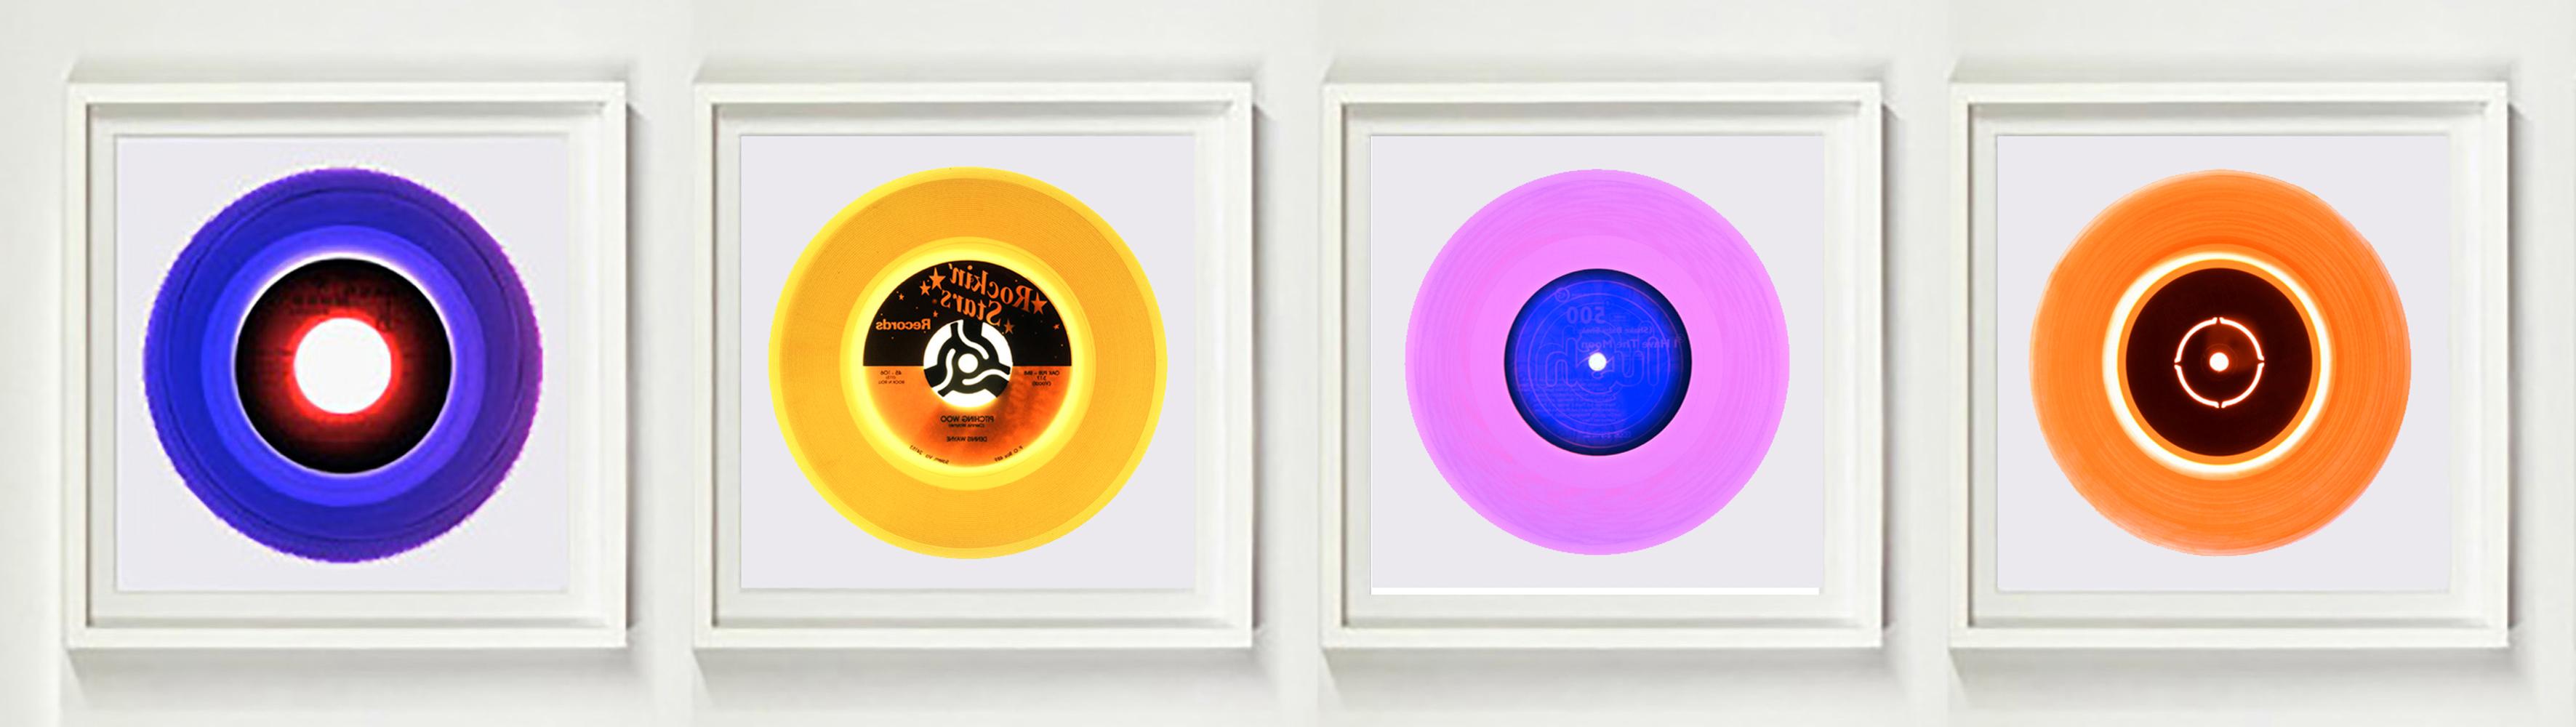 B Side Vinyl Collection Set of Four - Pop Art Multi-Color Photo - Photograph by Heidler & Heeps